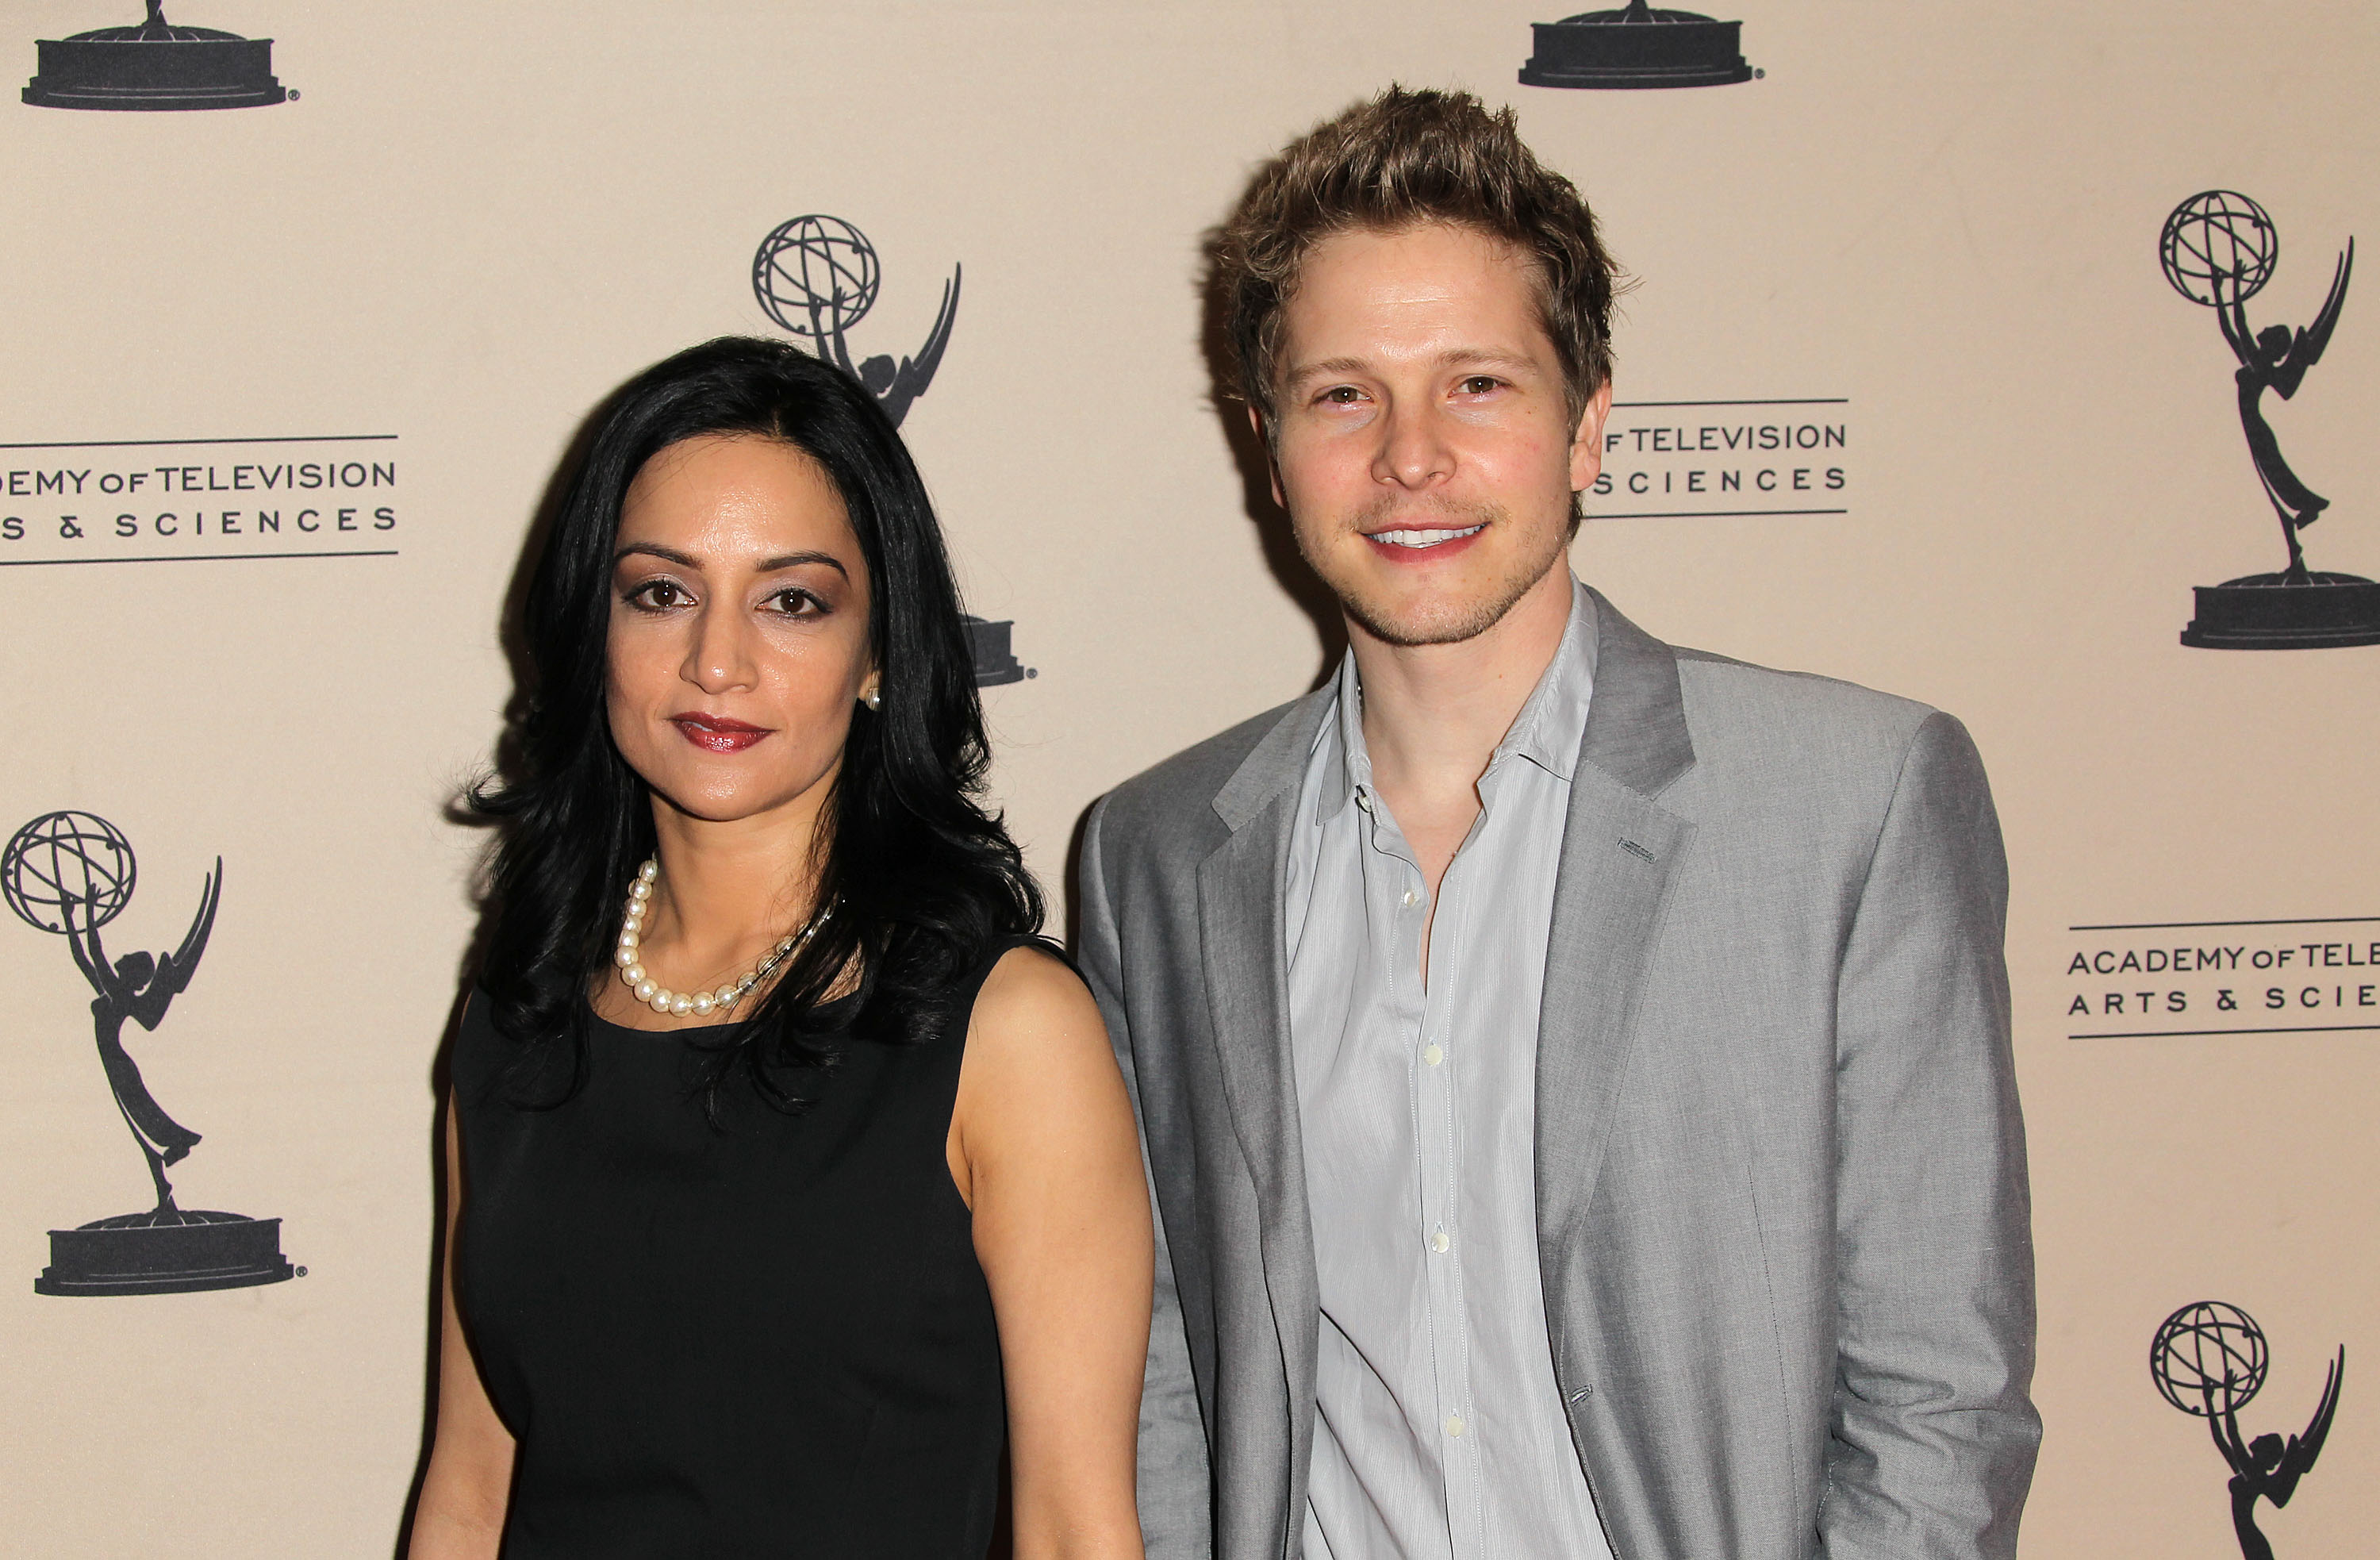 Archie Panjabi and actor Matt Czuchry on January 31, 2011, in North Hollywood, California. | Source: Getty Images